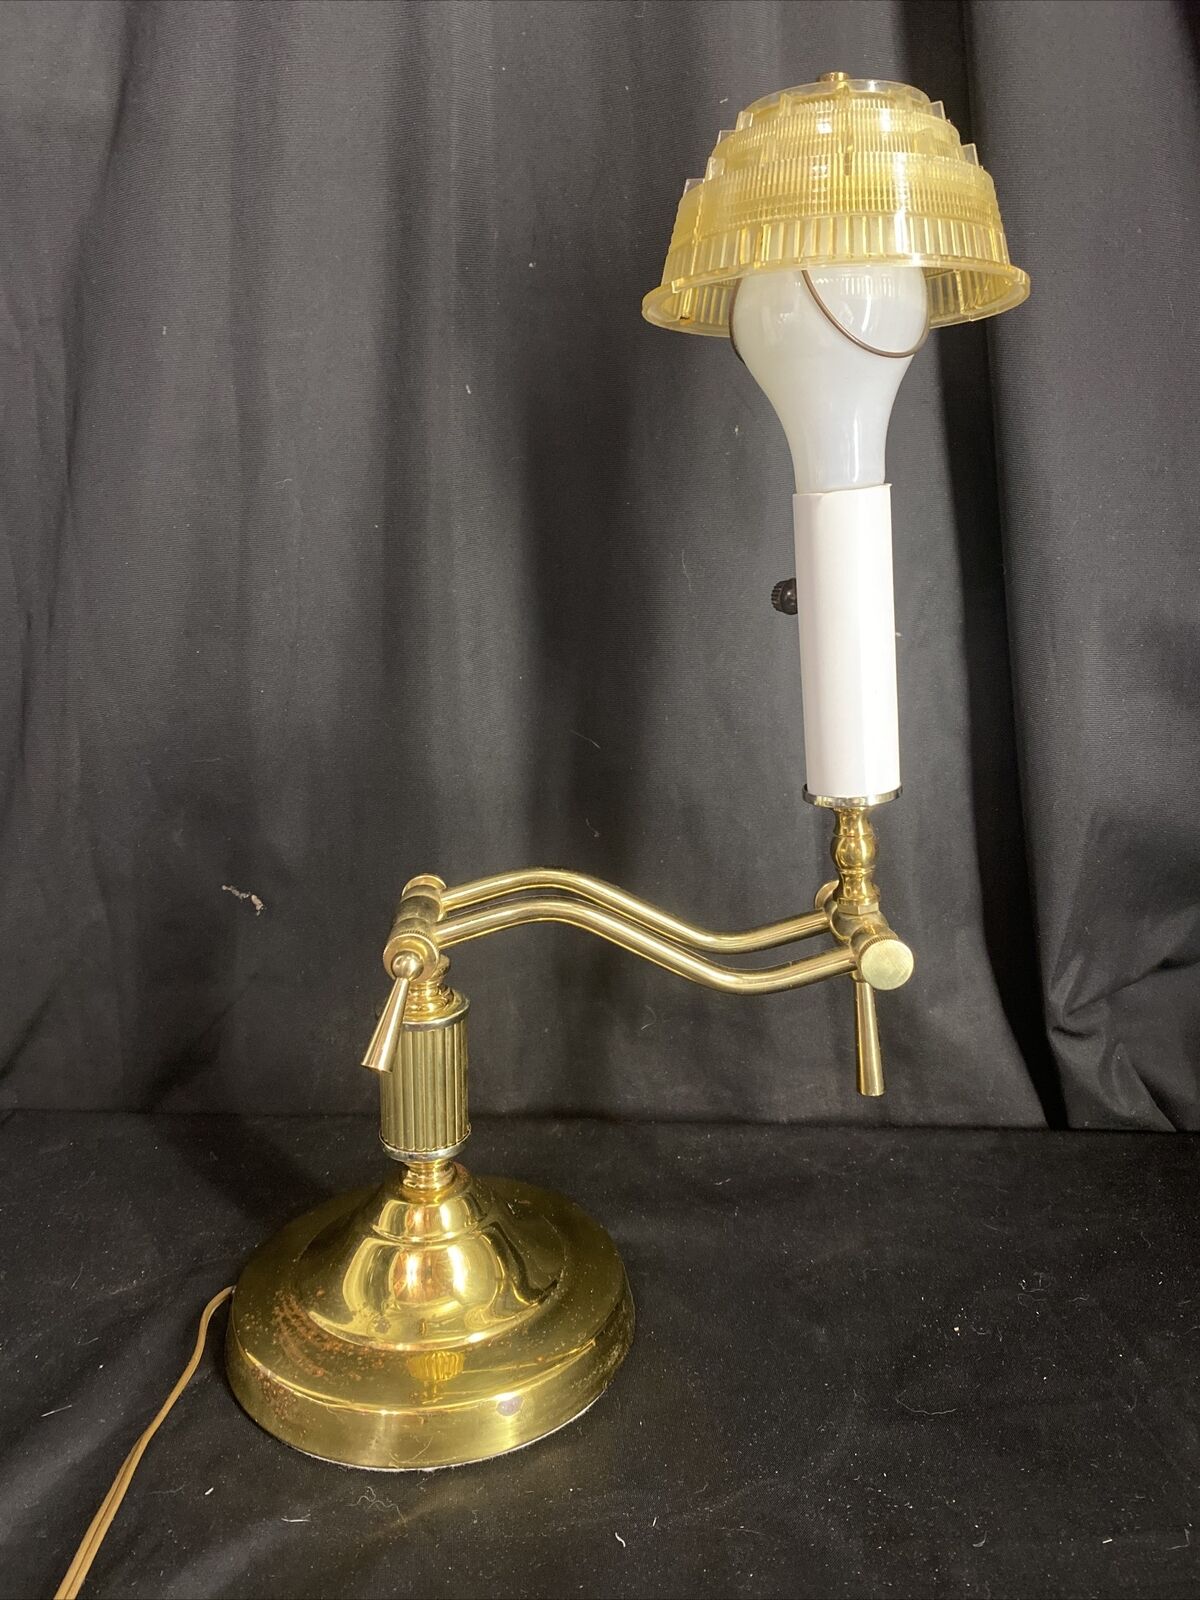 Brass Table Lamp Student Desk Lamp Piano Light Adjustable With Shade